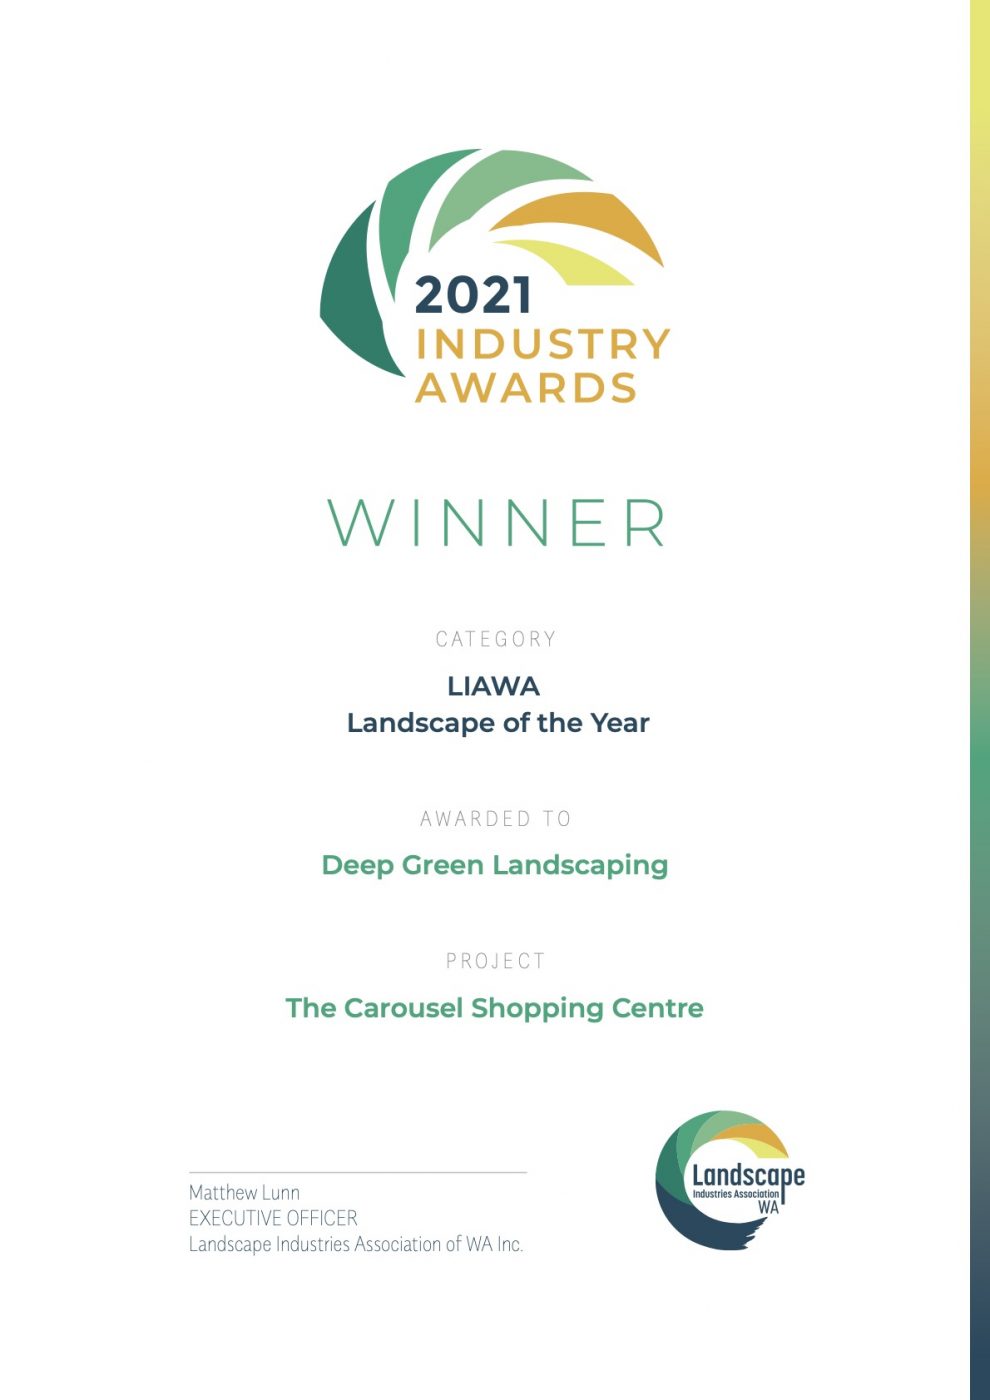 2021 Industry Award Winner for Landscape of the year